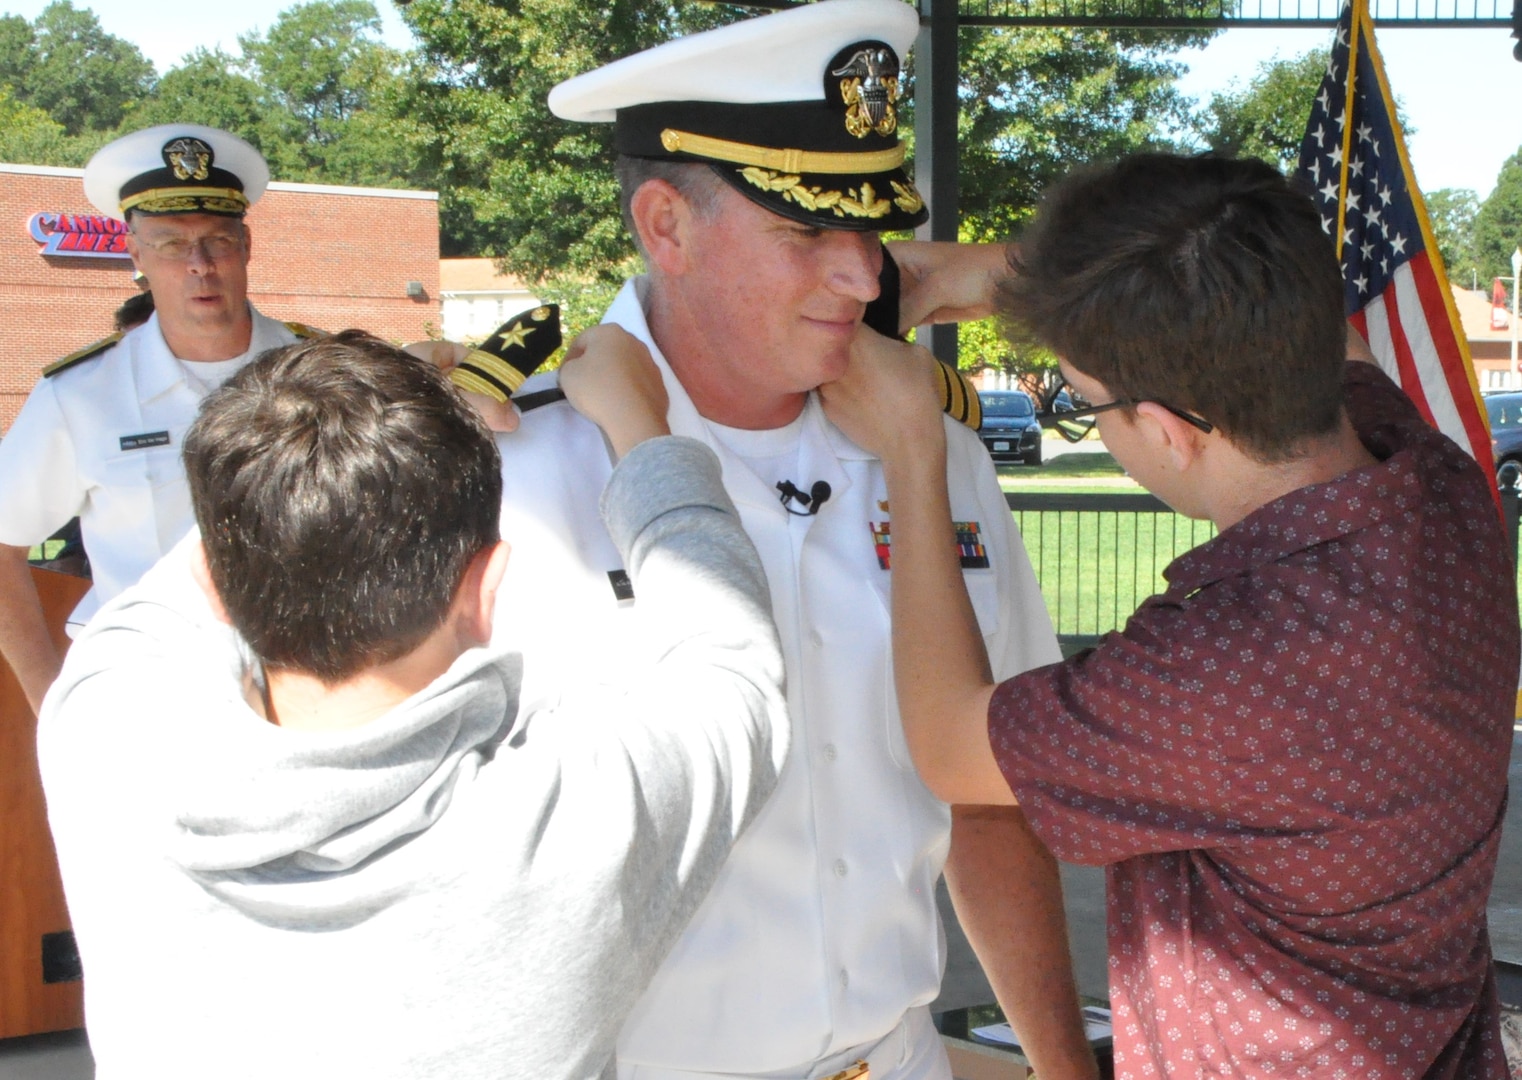 IMAGE: DAHLGREN, Va. (Aug. 30, 2019) – Quinn and Elijah Plew attach new shoulder boards on their father, Capt. Casey Plew, during his promotion ceremony at Naval Surface Warfare Center Dahlgren Division (NSWCDD). It was Plew’s second ceremony marking a career milestone in four months. The new Navy captain took command of NSWCDD – the Naval Sea System Command’s largest Naval Warfare Center – at a ceremony held on the Potomac River Test Range in April.